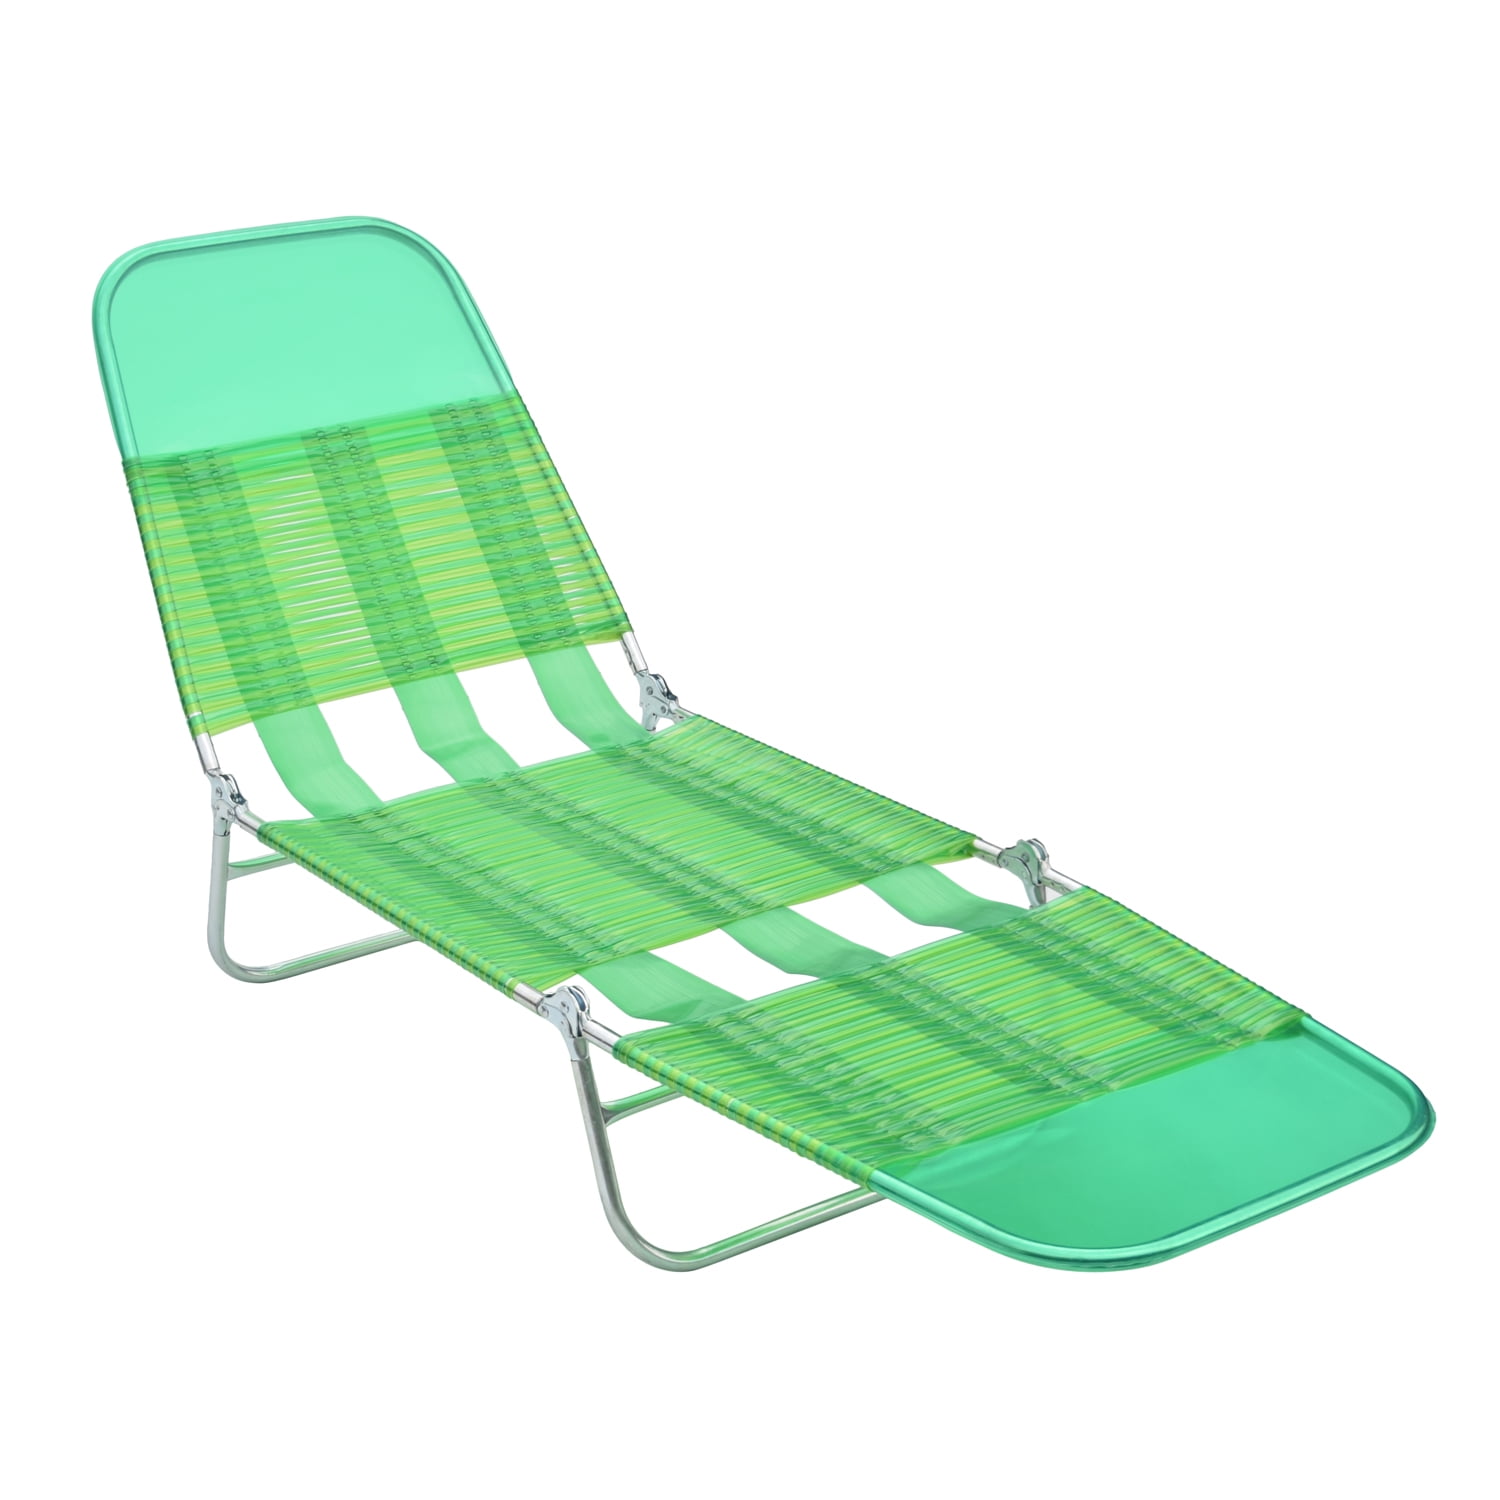  Walmart Jelly Beach Chair for Large Space